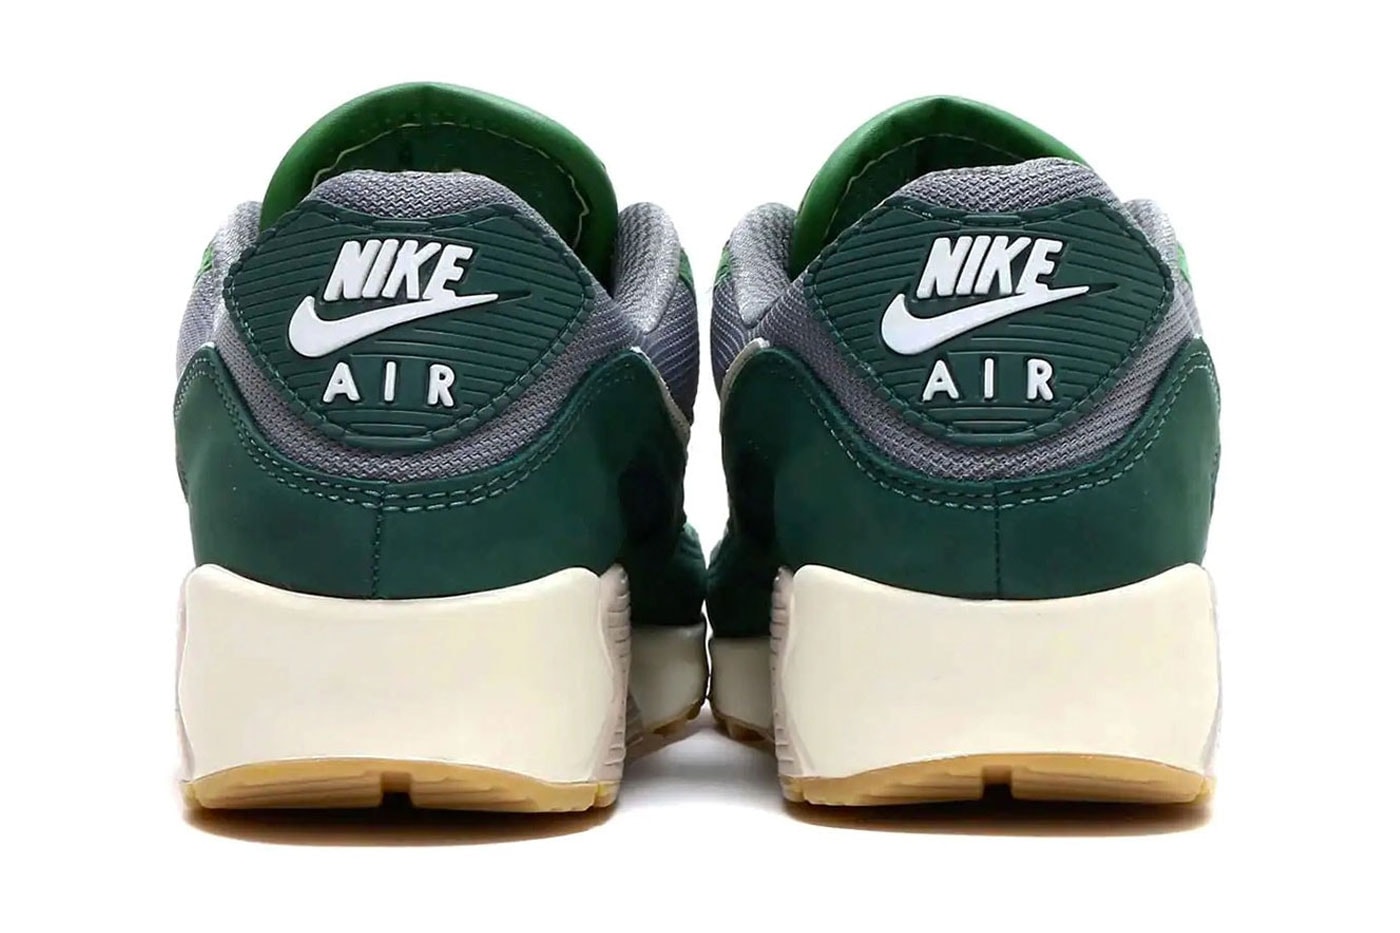 Nike Air Max 90 Pro Green pale ivory forest green dh4621-300 release info air max day release info date price suede white sail grey